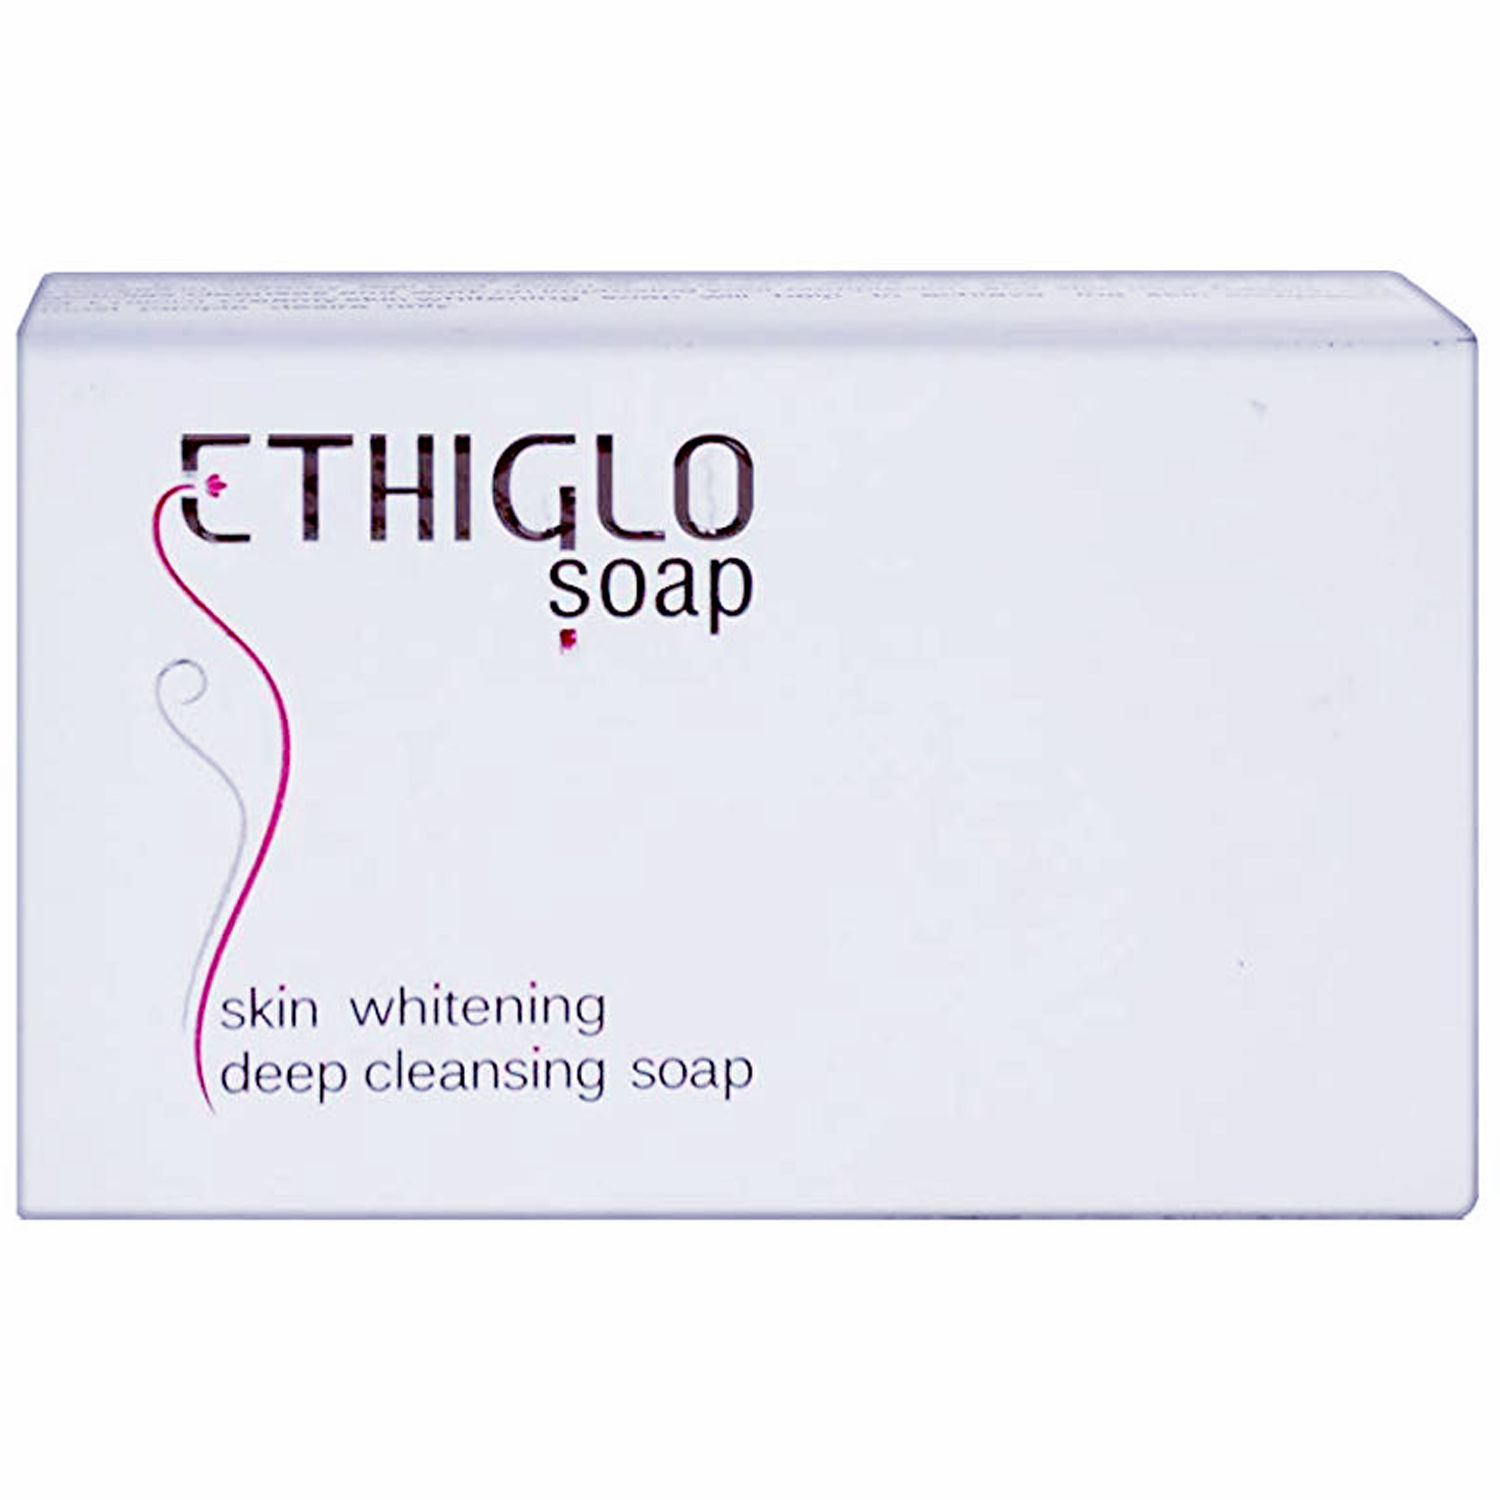 Ethiglo Soap, 75 gm, Pack of 1 